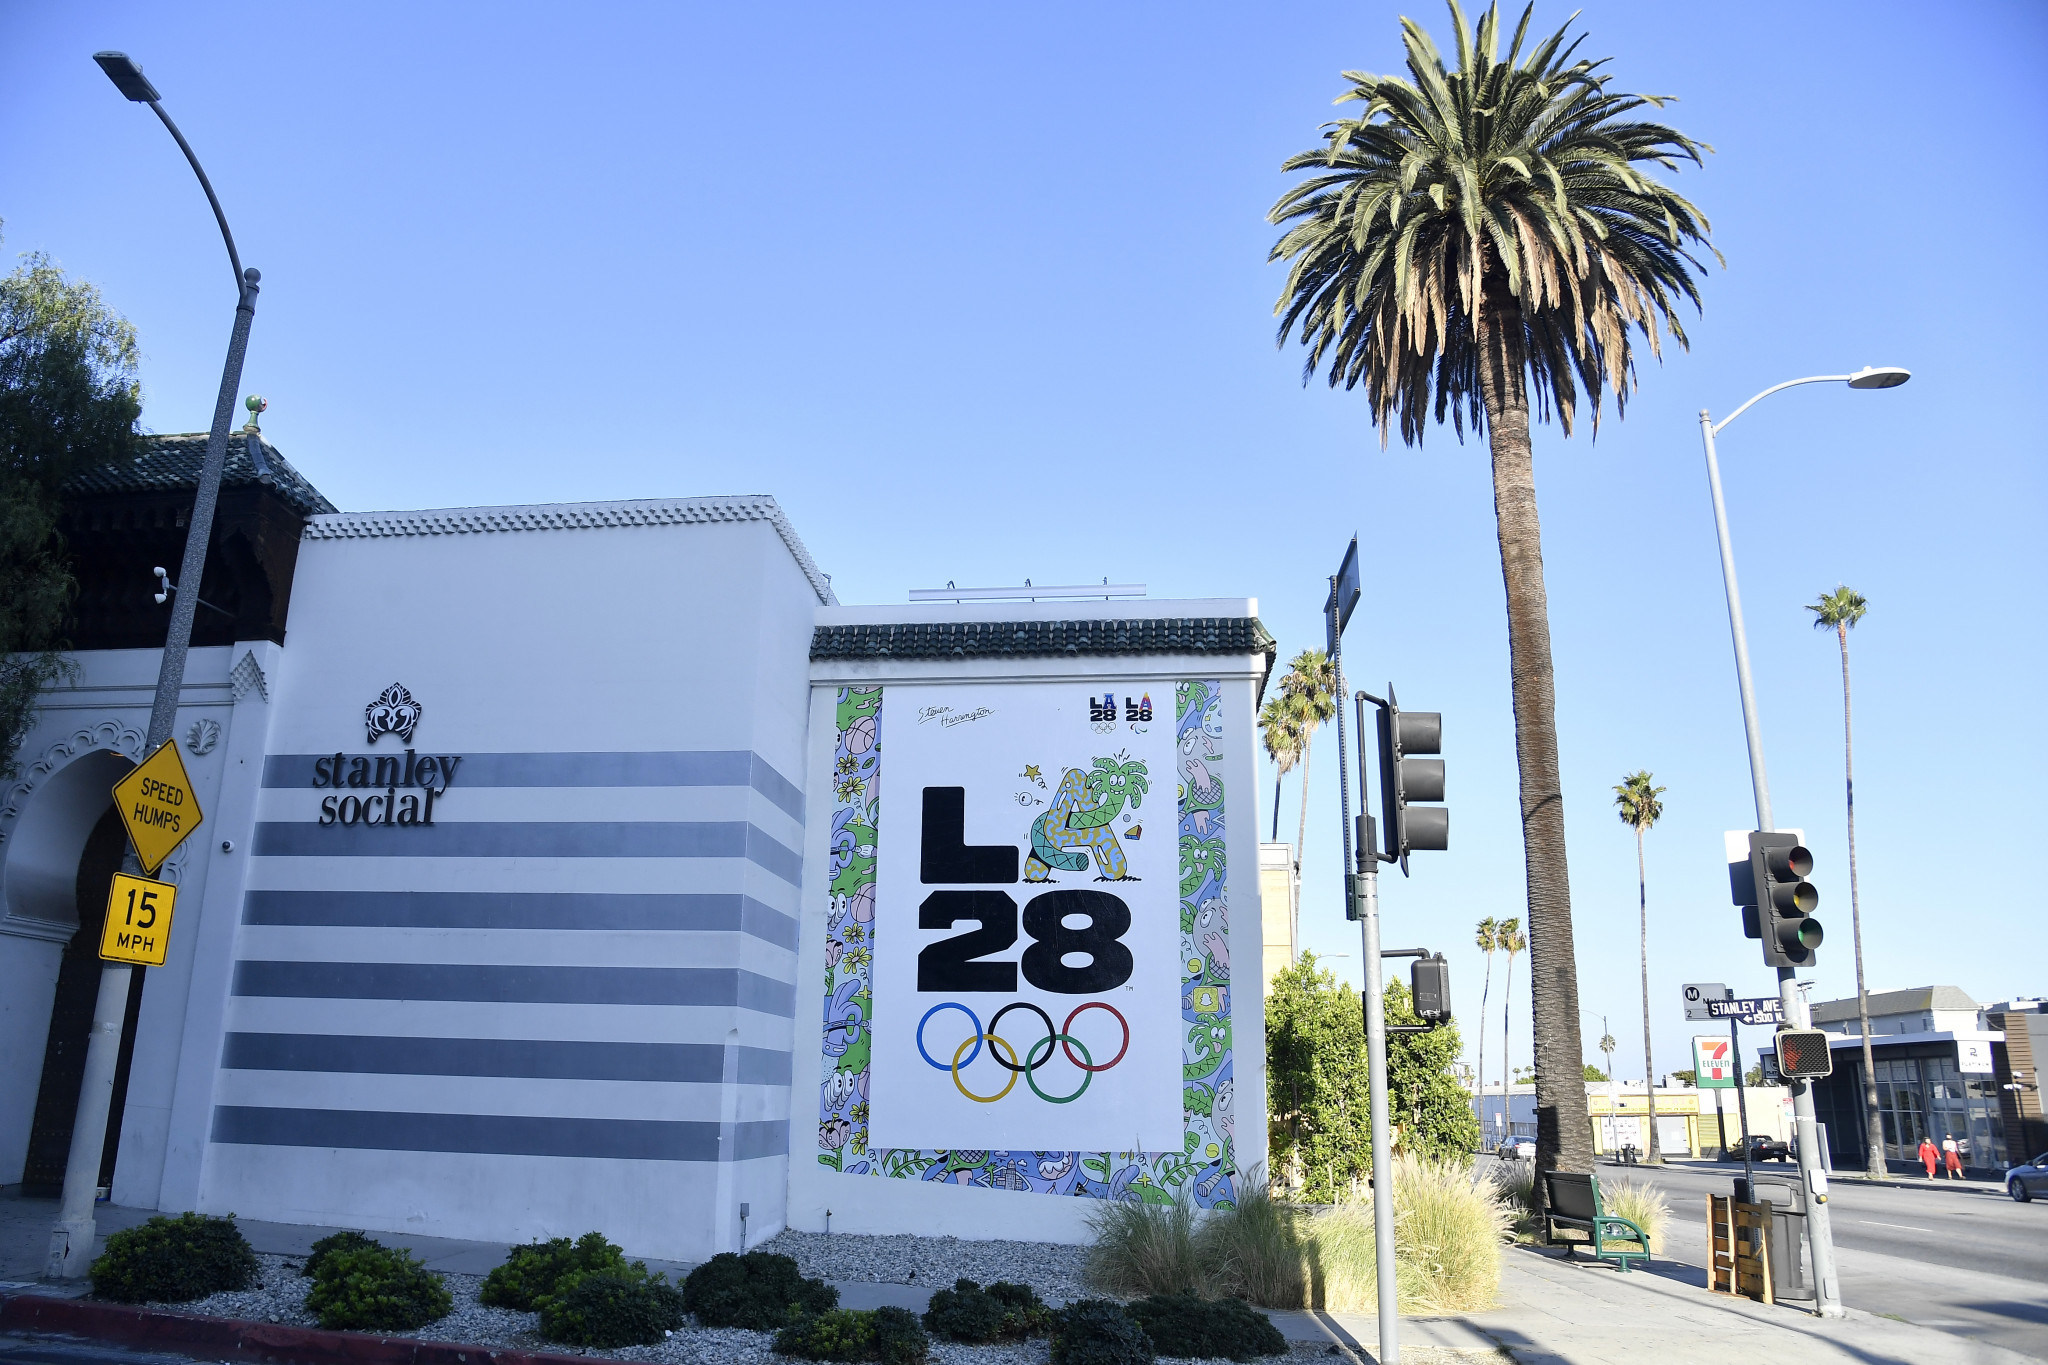 Los Angeles is set to host the Olympic Games in 2028, where teqball hopes to be a part of the programme ©Getty Images